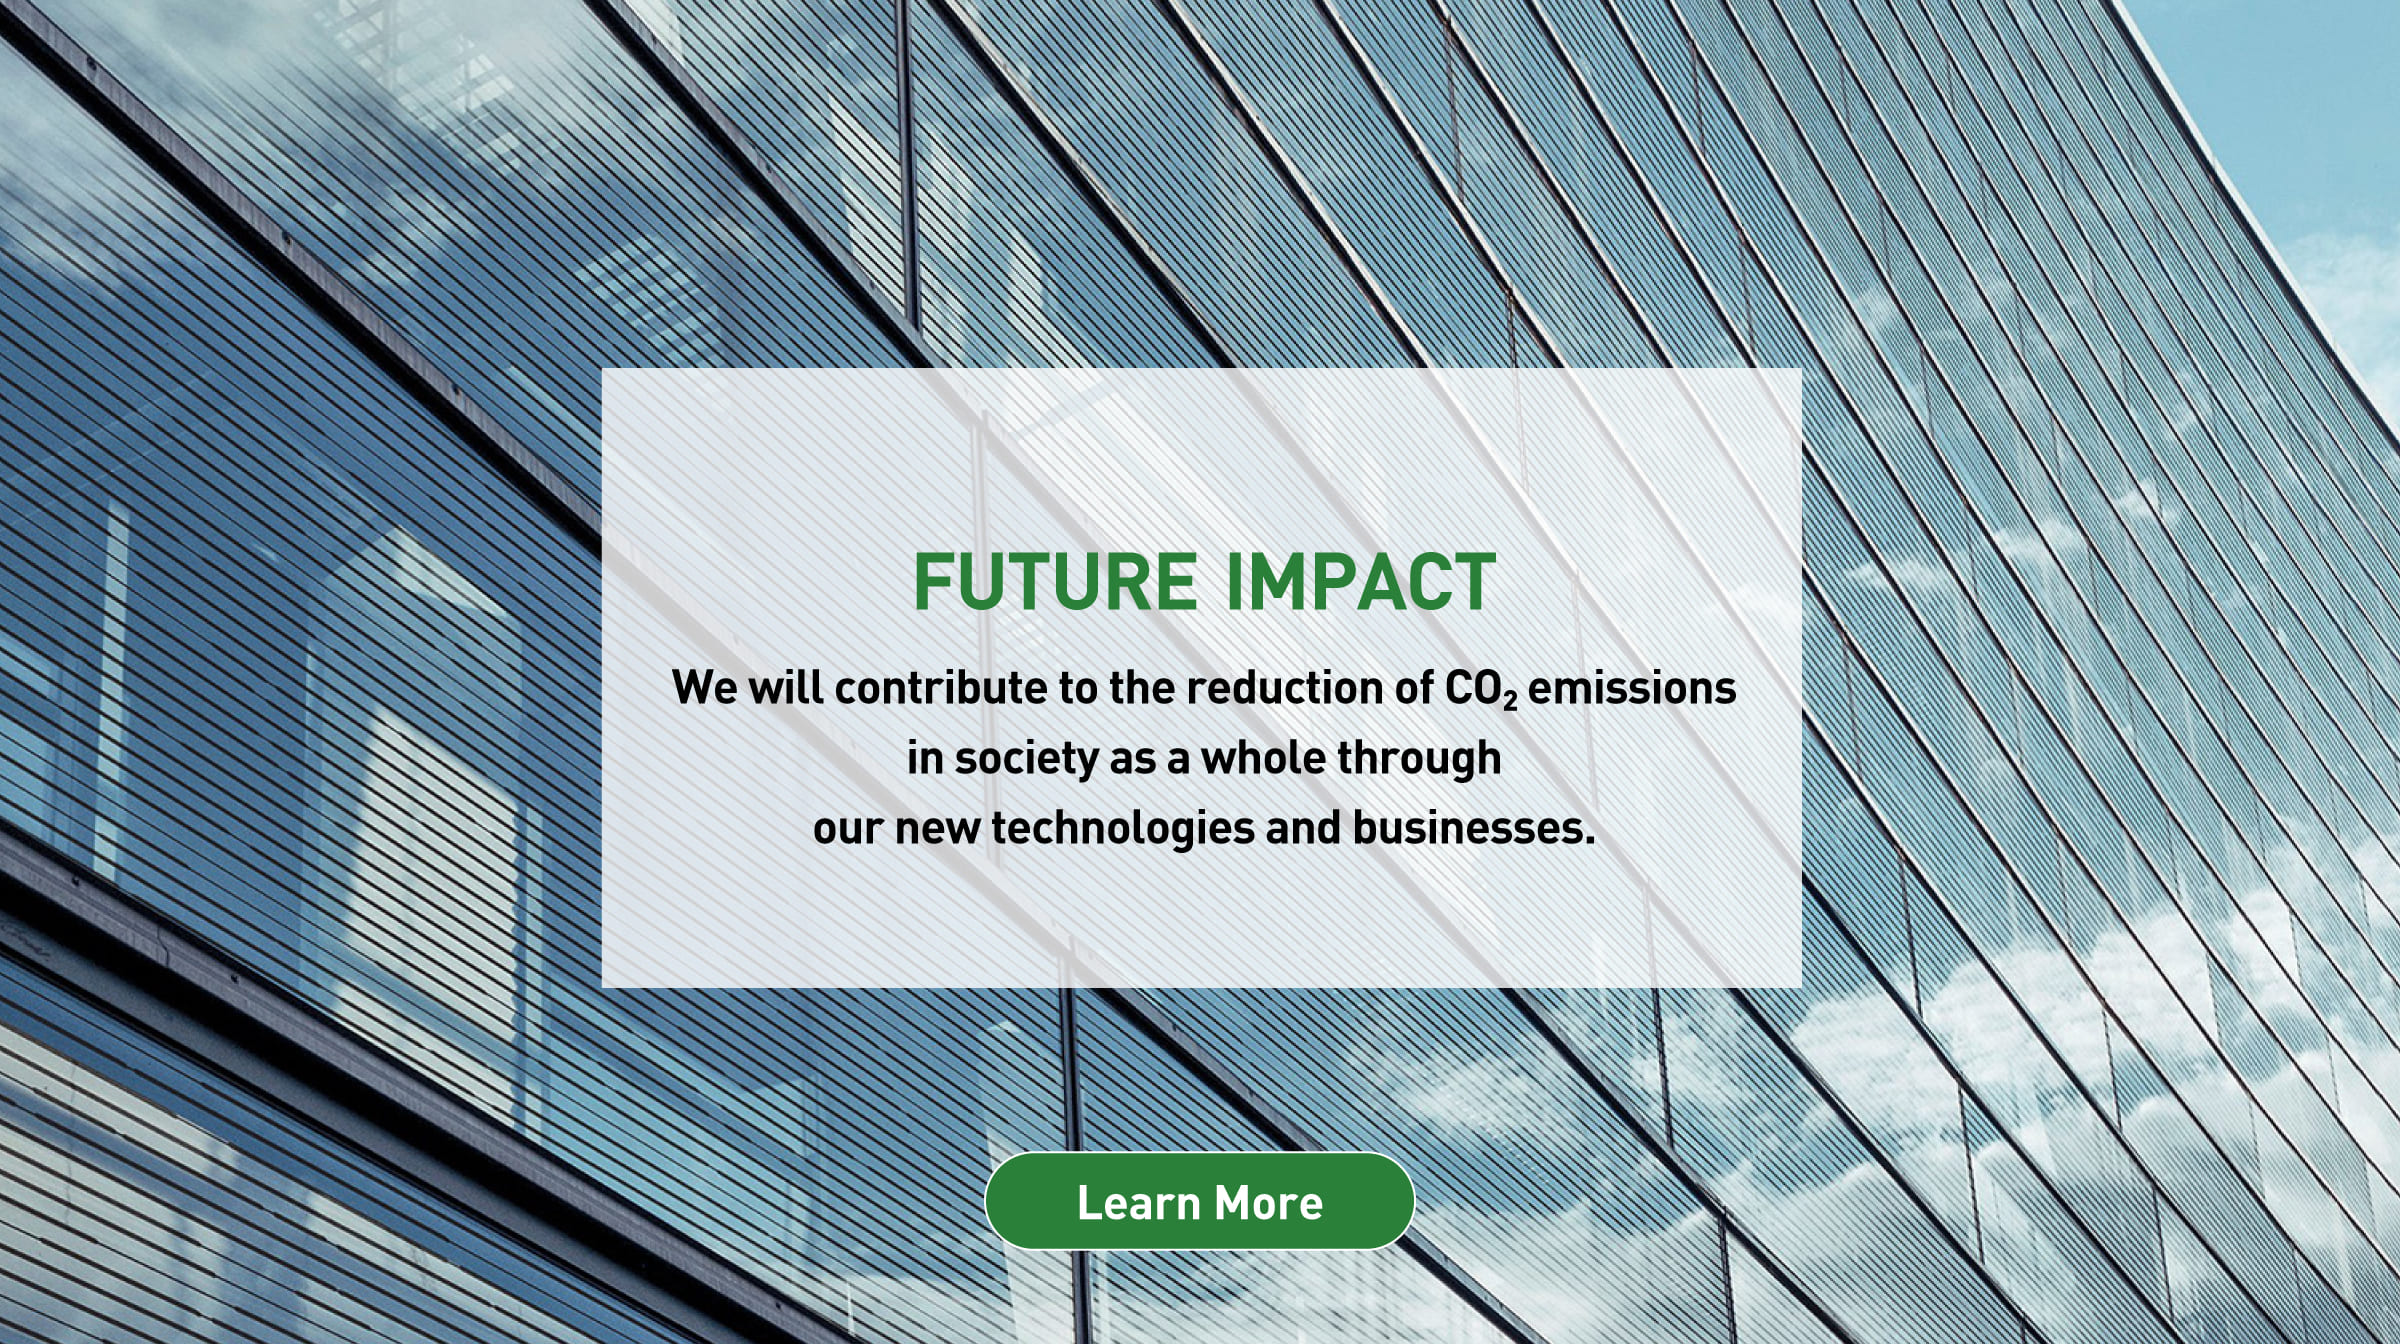 FUTURE IMPACT: We will contribute to the reduction of CO2 emissions in society as a whole through our new technologies and businesses. Background photo: CGI image showing the use of Perovskite solar cells on the windows of a skyscraper. Learn more.